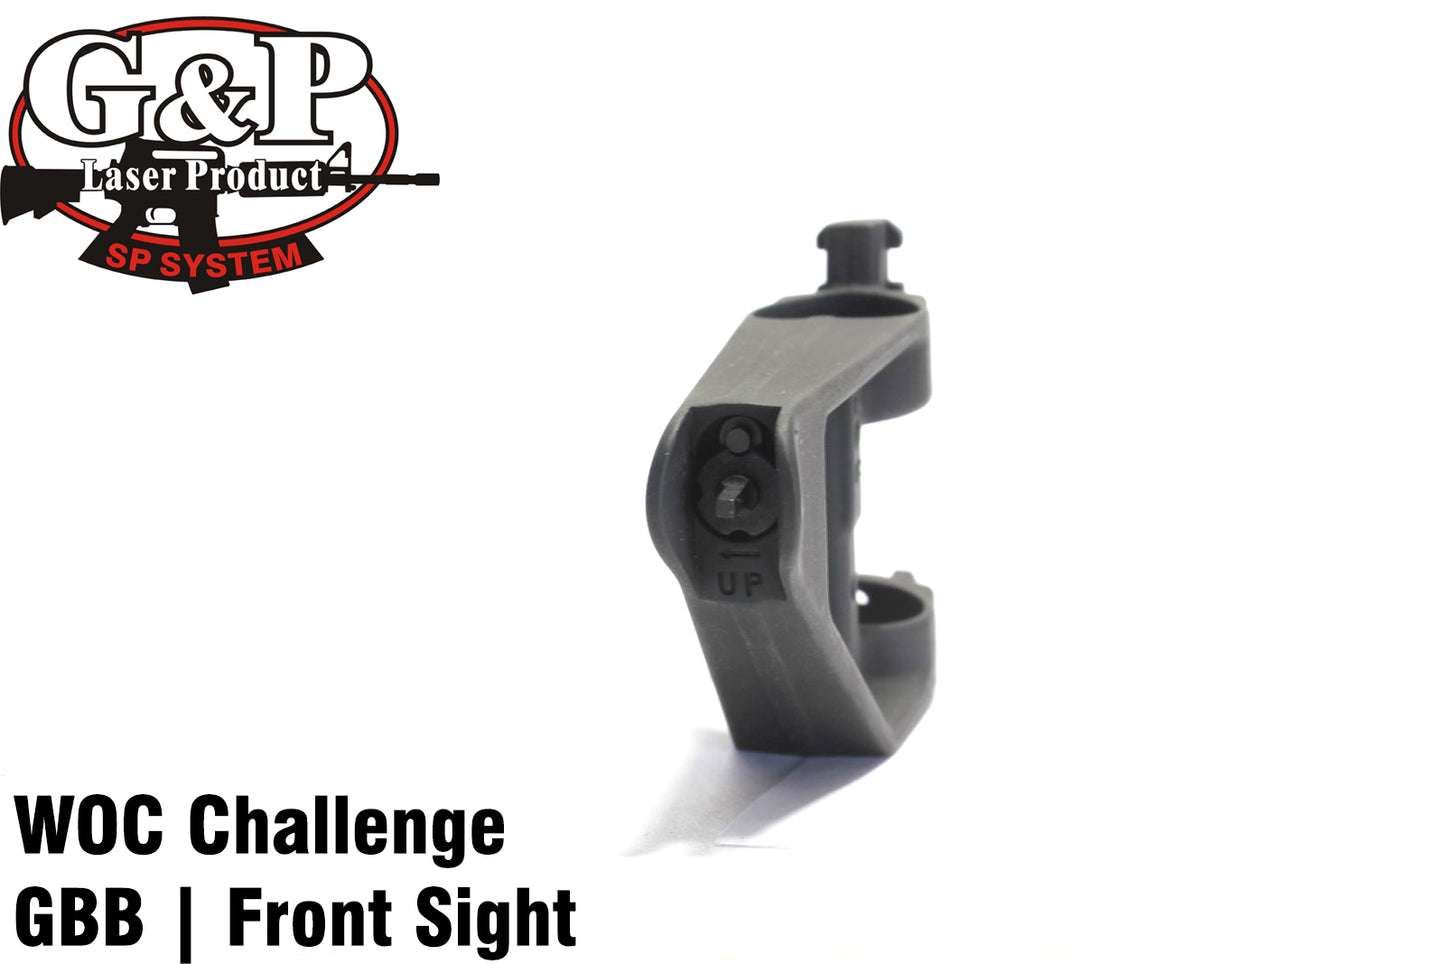 G&P Licensed Magpul PTS GBB Front Sight